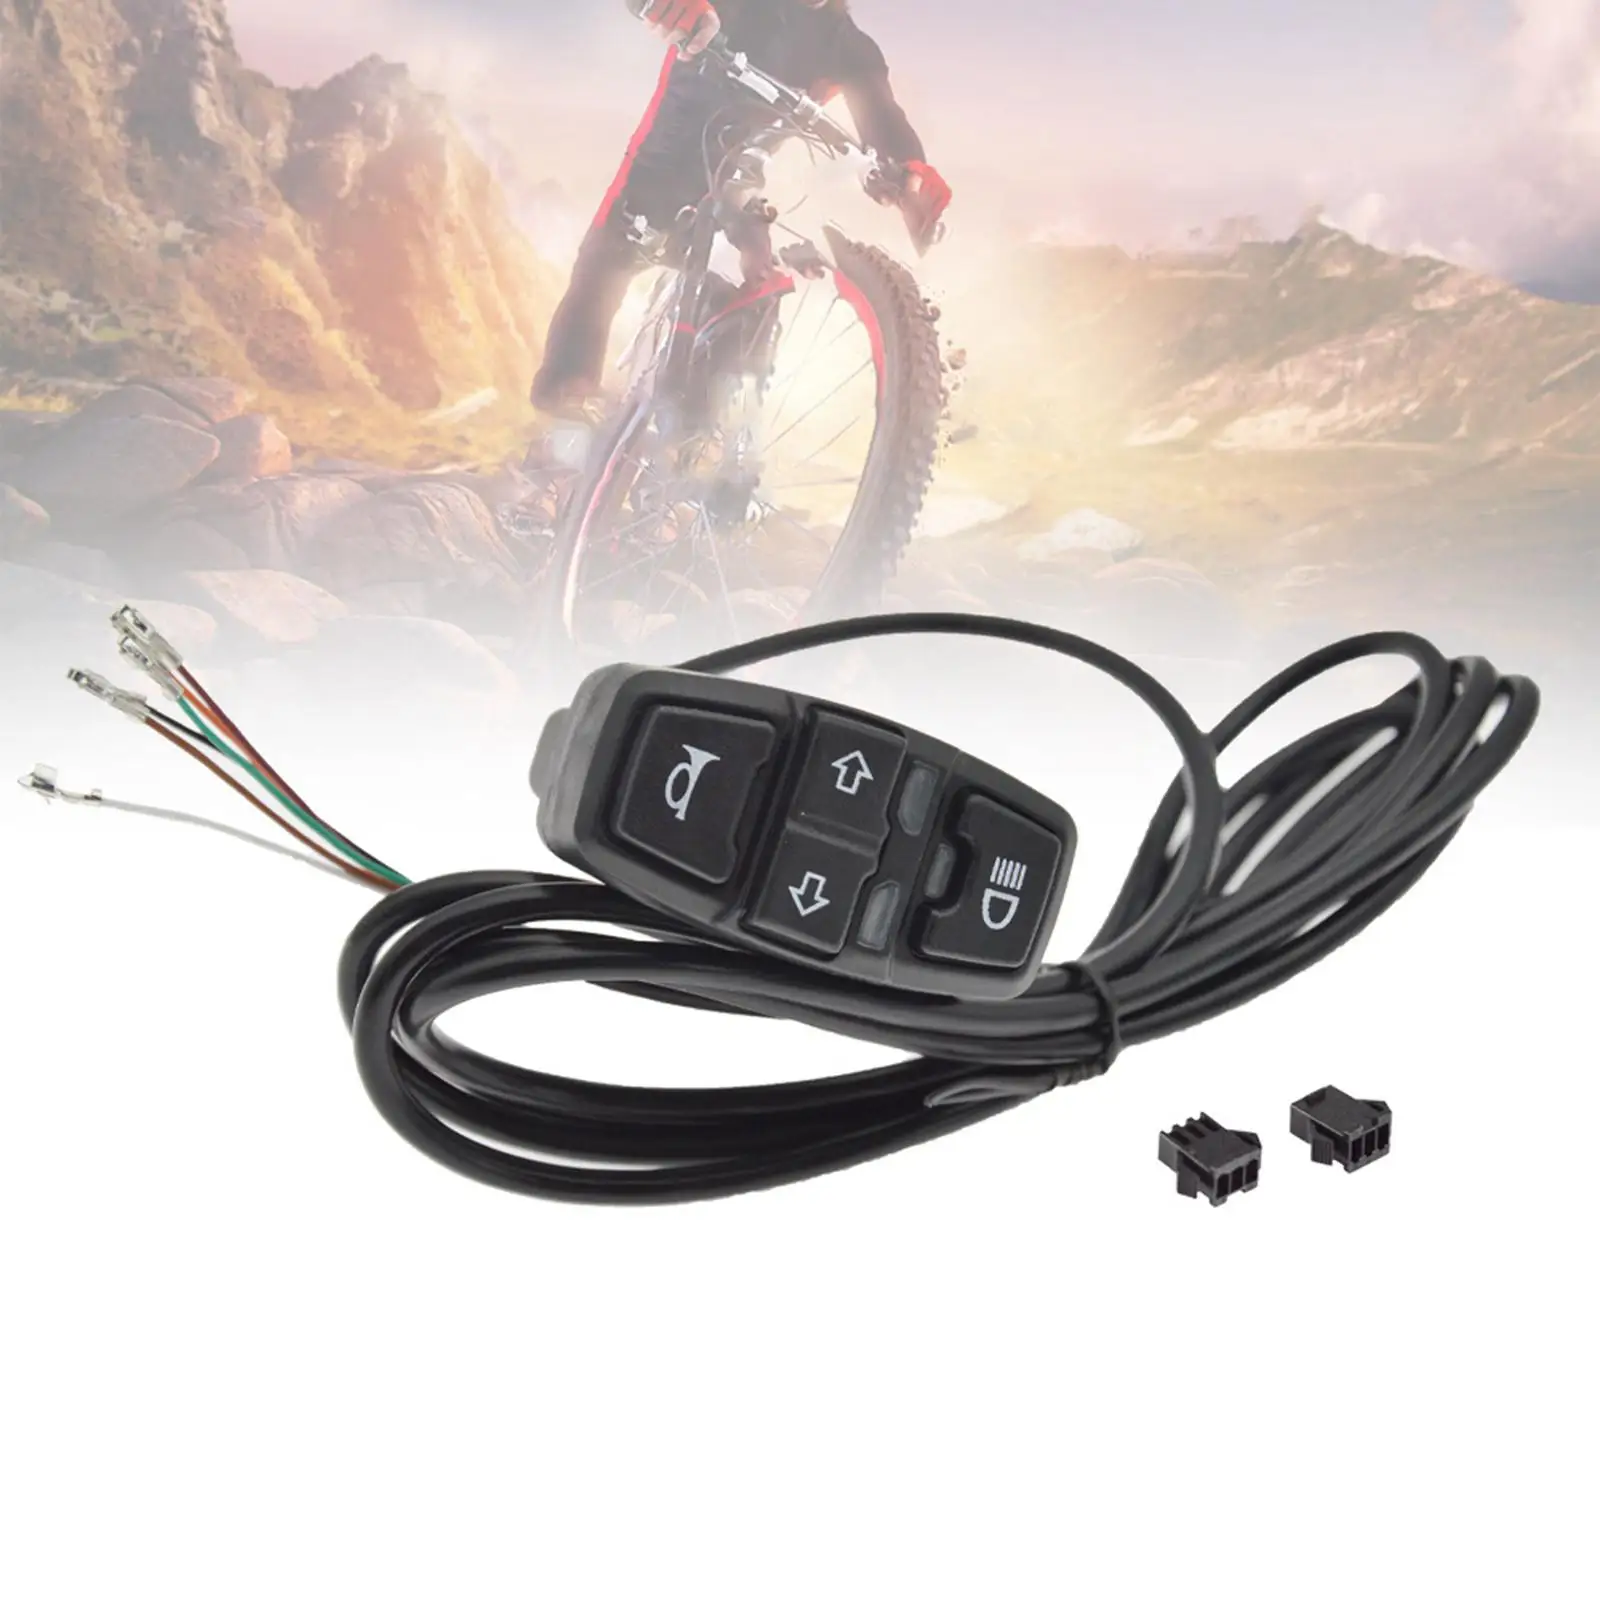 Frontlight Horn Cruise Turning Light Switch Bike Handlebar Control Button Switch Replacement Parts for Motorcycle Electric Bike